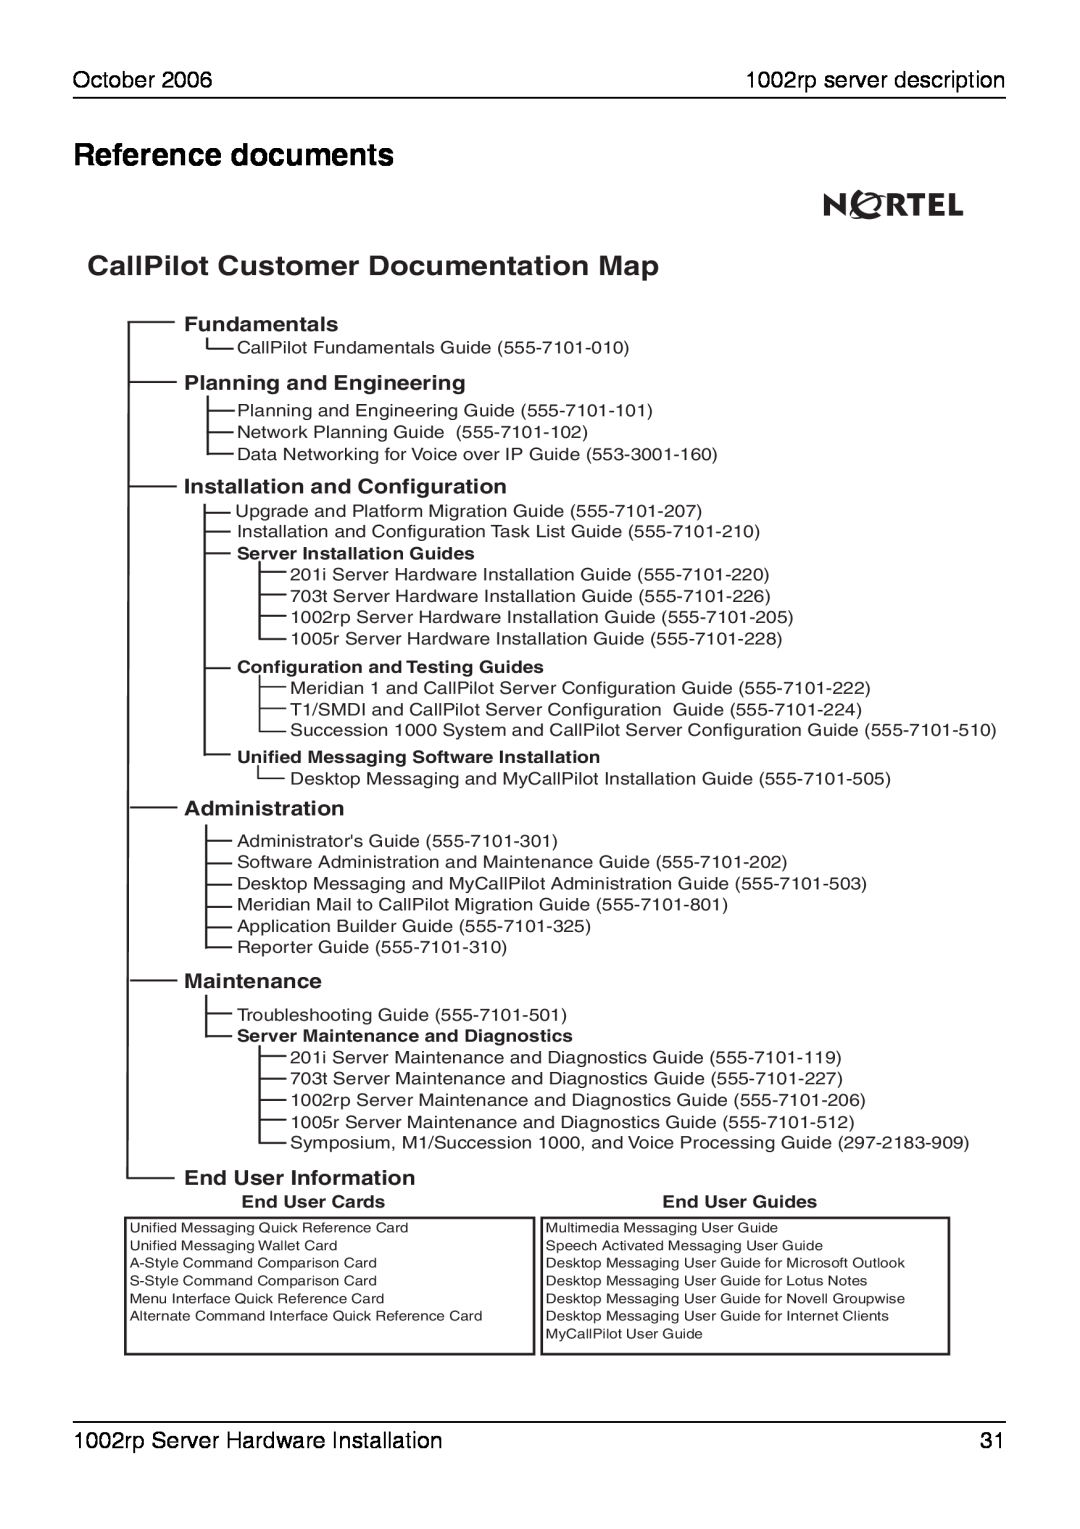 Nortel Networks 1002rp Reference documents, CallPilot Customer Documentation Map, Fundamentals, Planning and Engineering 